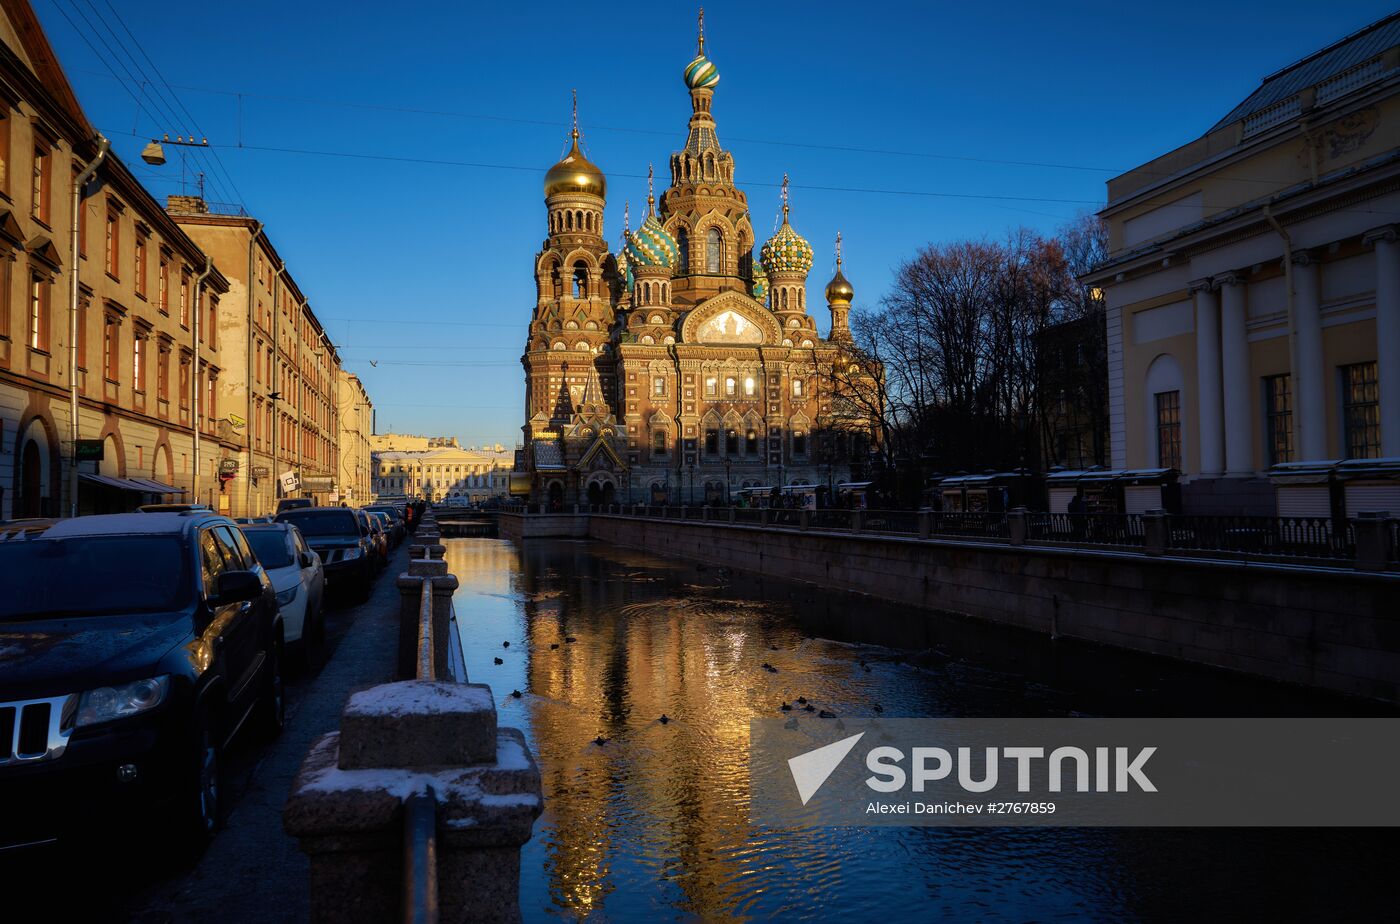 Church of the Savior on Spilled Blood in St. Petersburg named one of the world's most beautiful churches